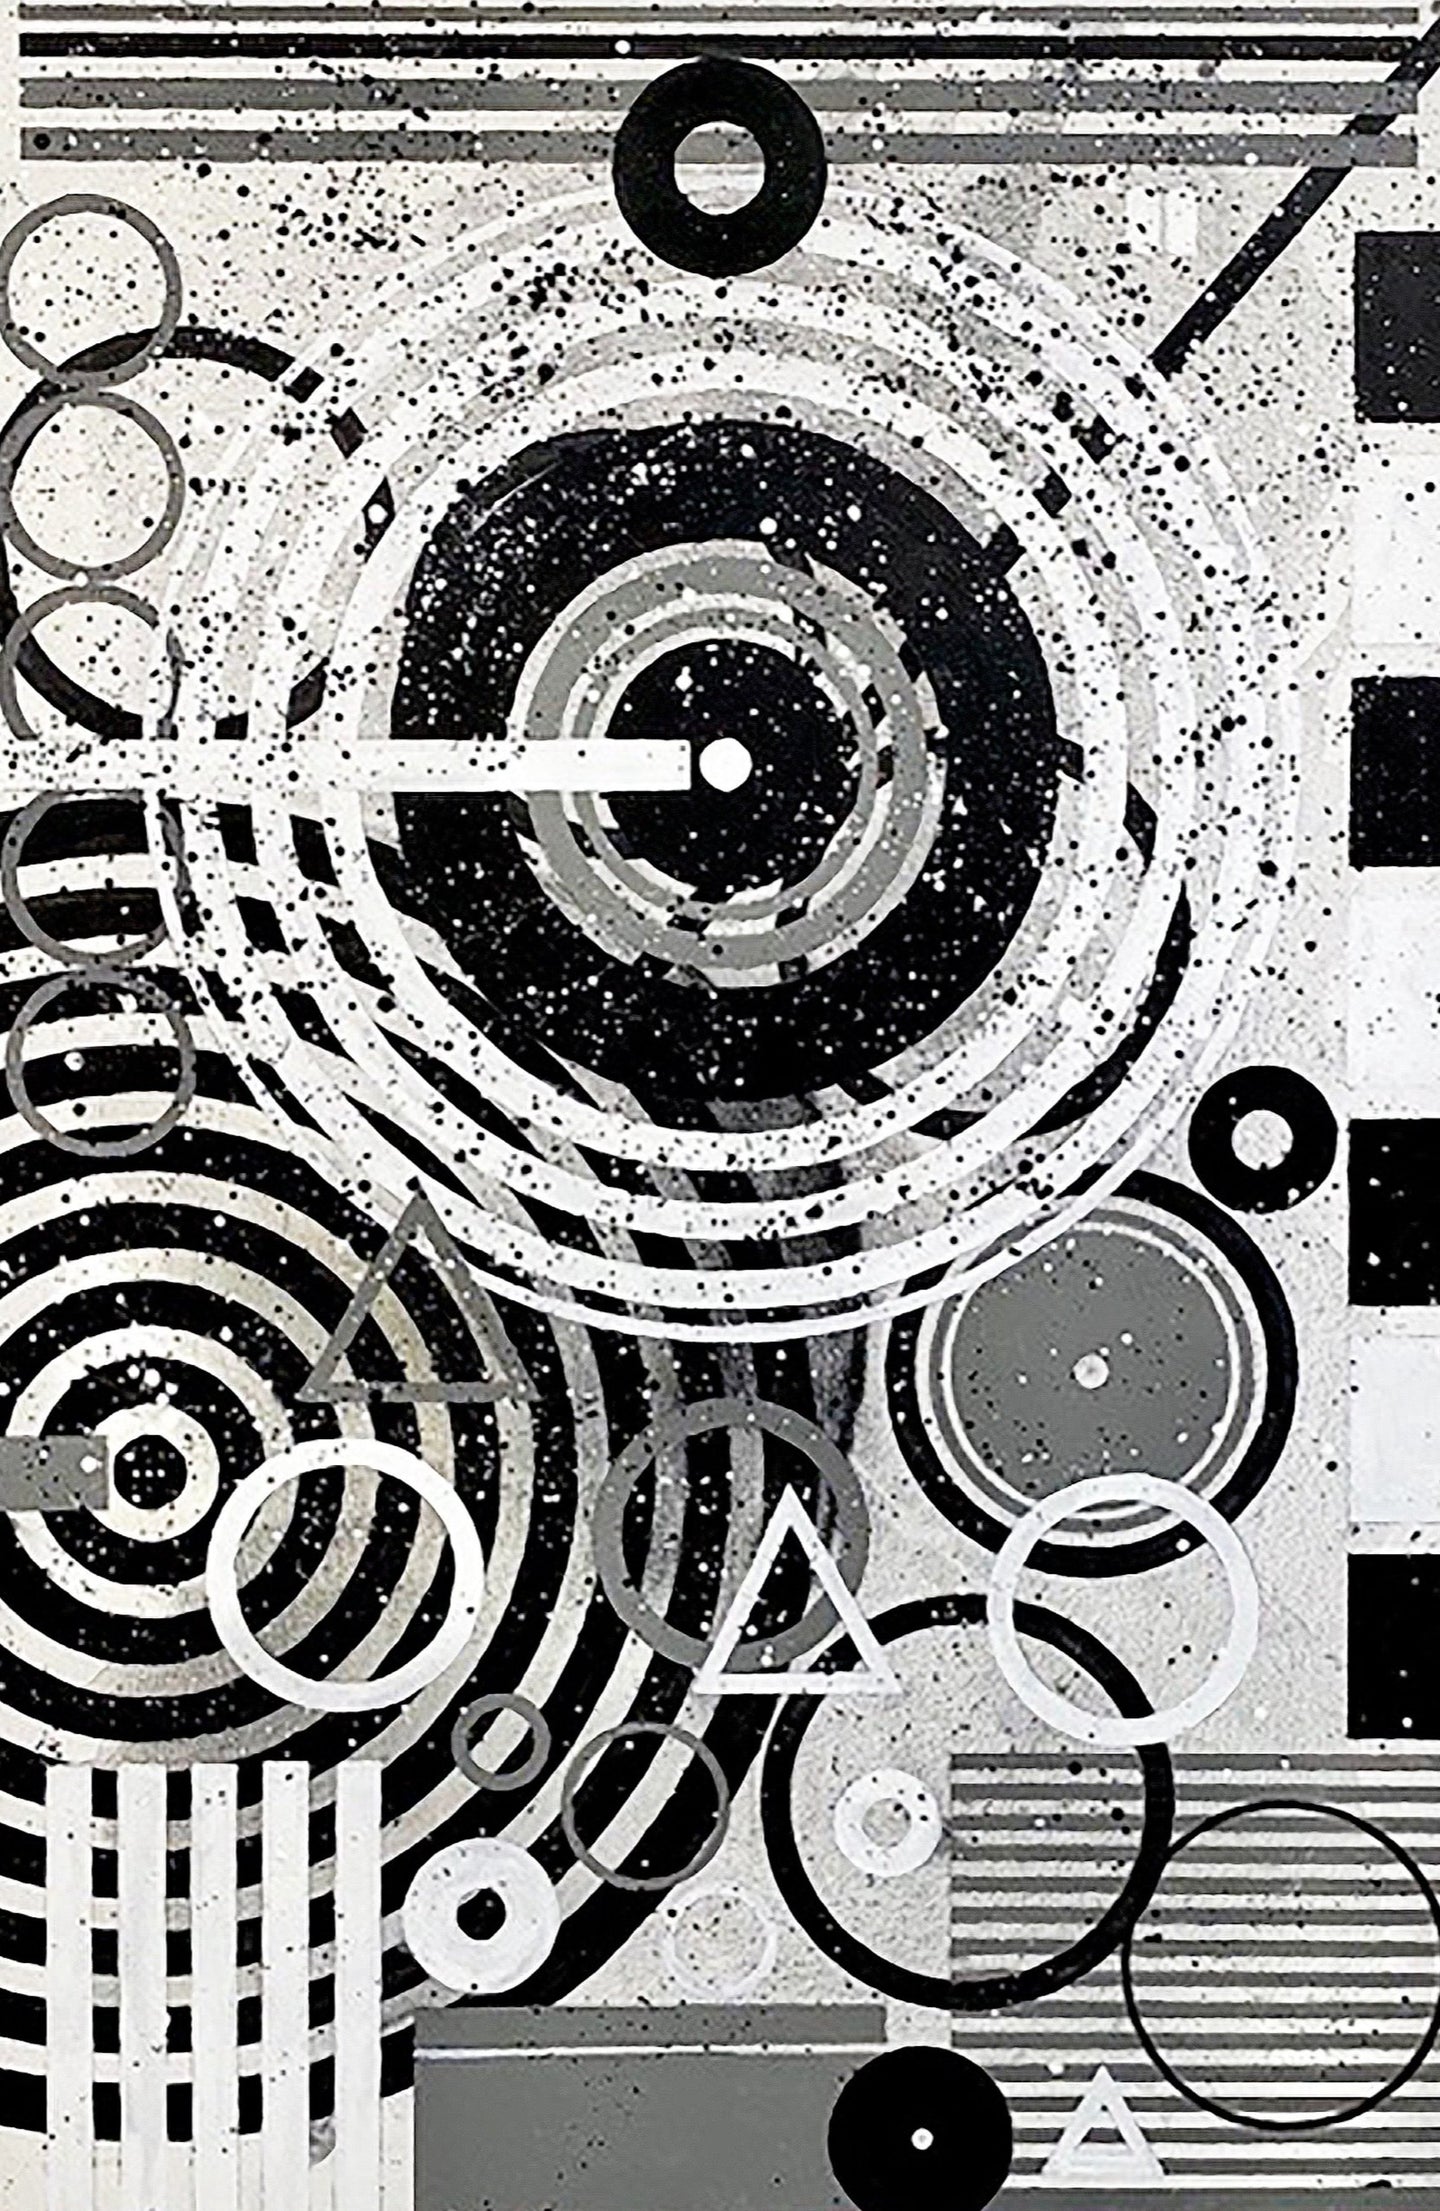 j. steven manolis, Black & White (Concentric) 2020, 72 x 48 inches, Acrylic on Canvas, Large Black and White Wall Art, Abstract expressionism art for sale at Manolis Projects Art Gallery, Miami, Fl